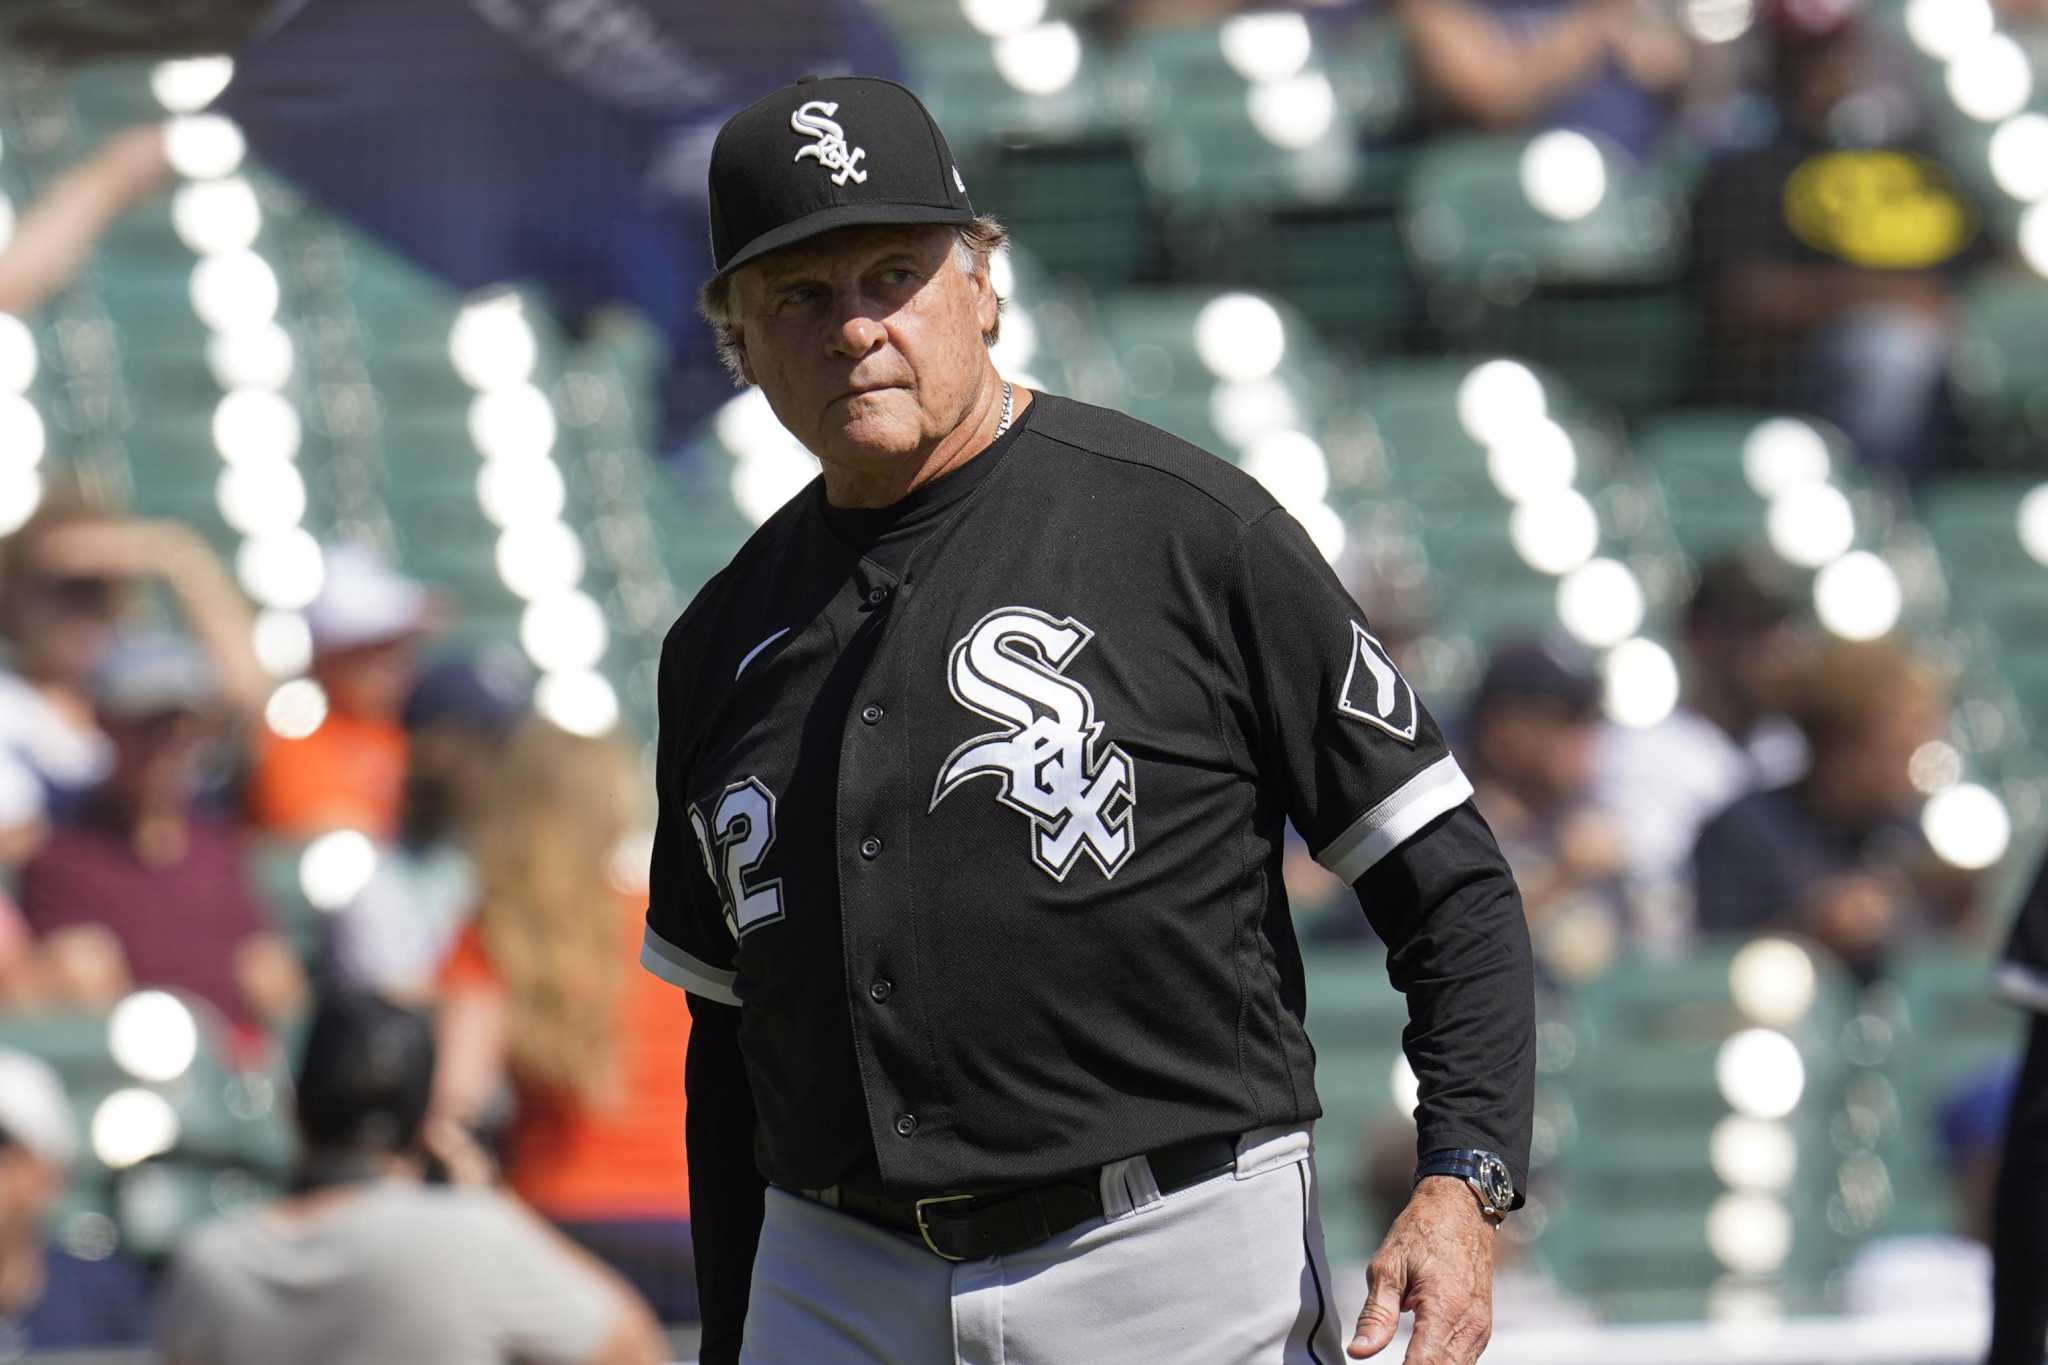 Tony La Russa eager for playoff return with White Sox